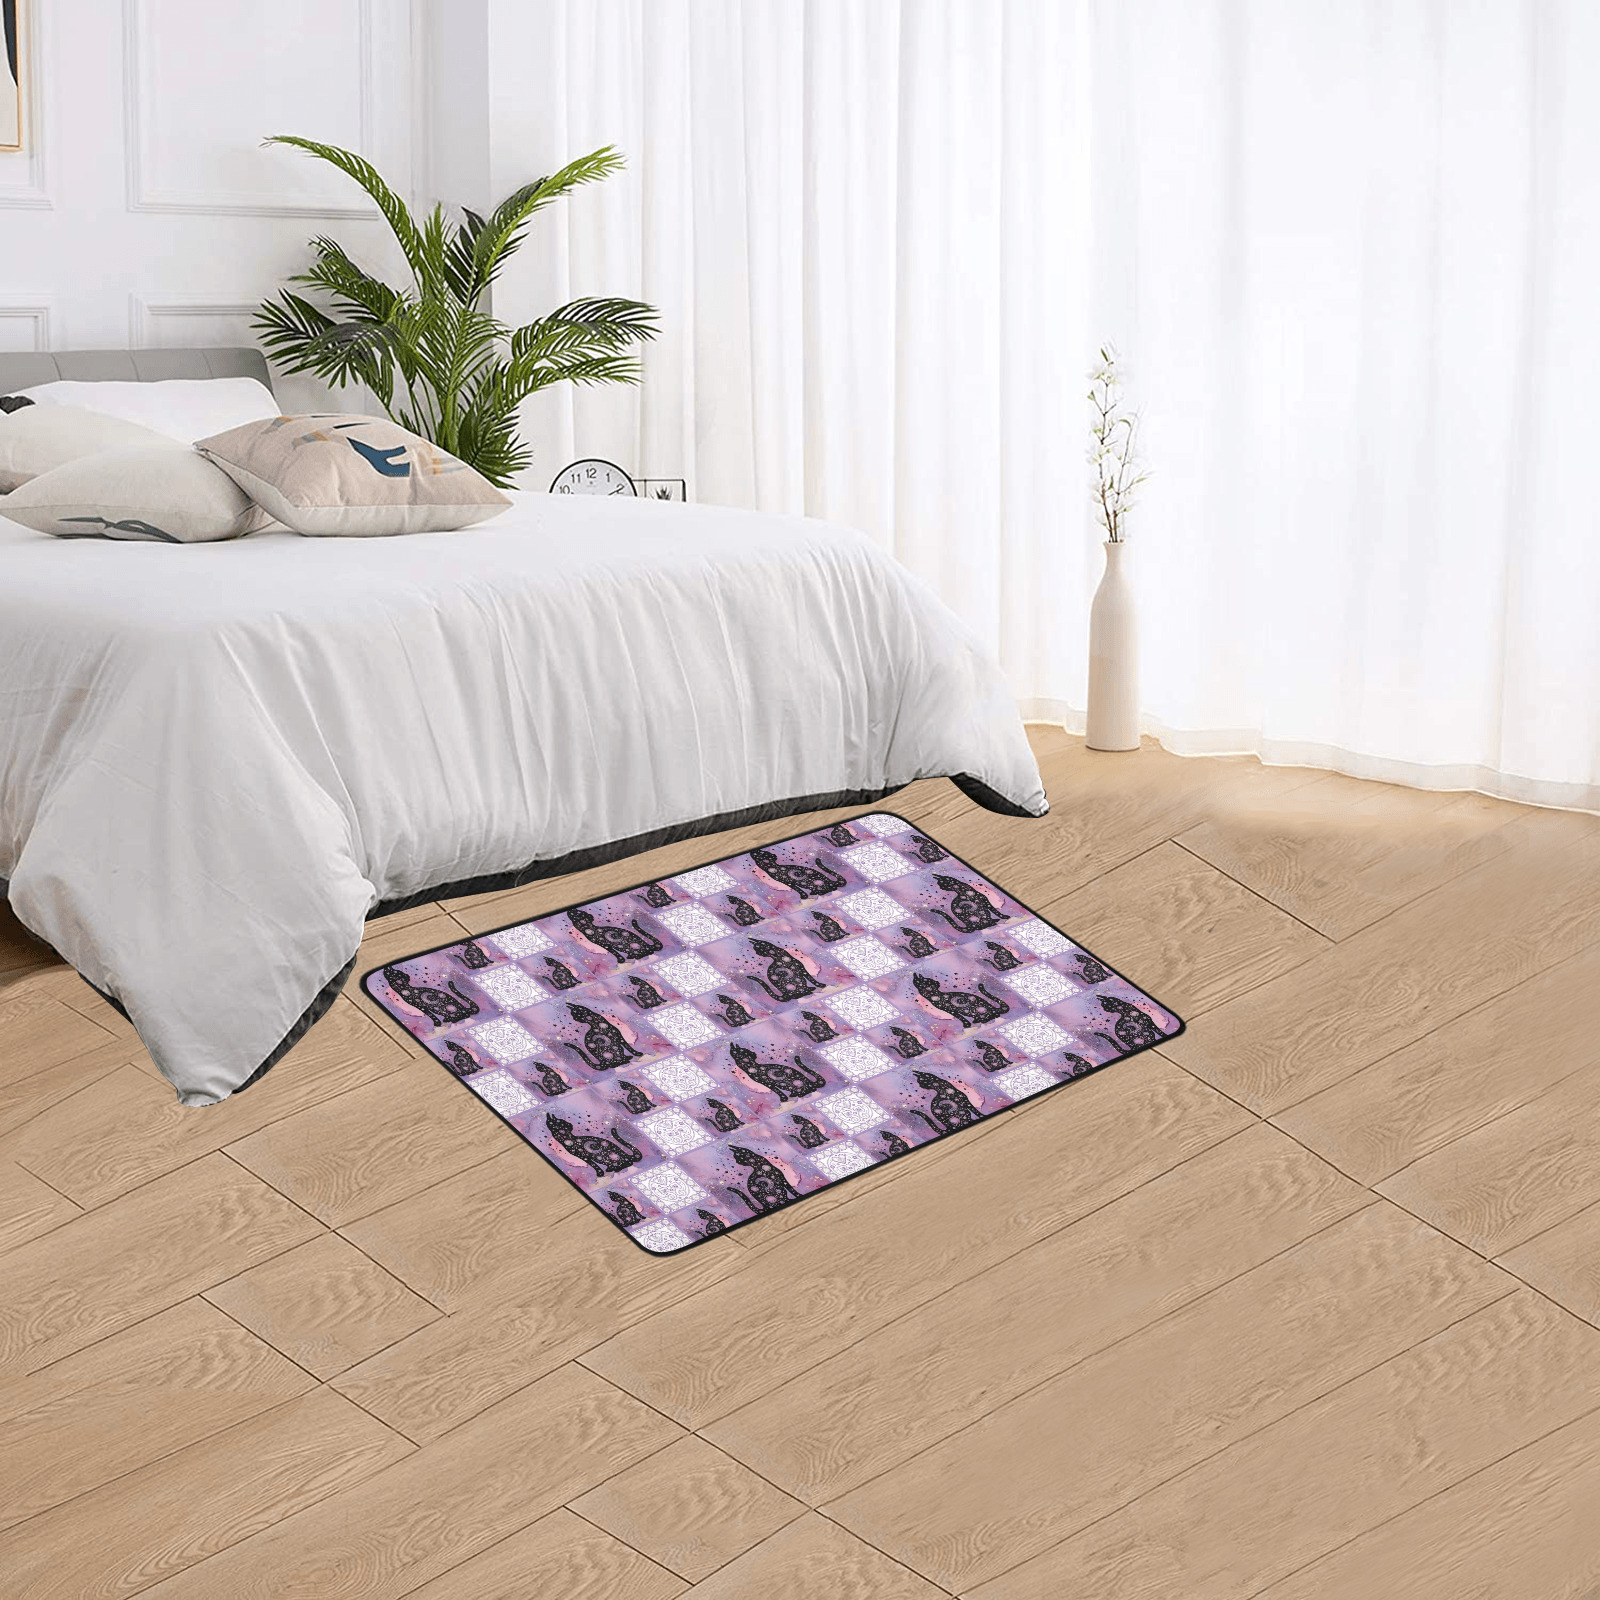 Purple Cosmic Cats Patchwork Pattern Area Rug with Black Binding 2'7"x 1'8‘’